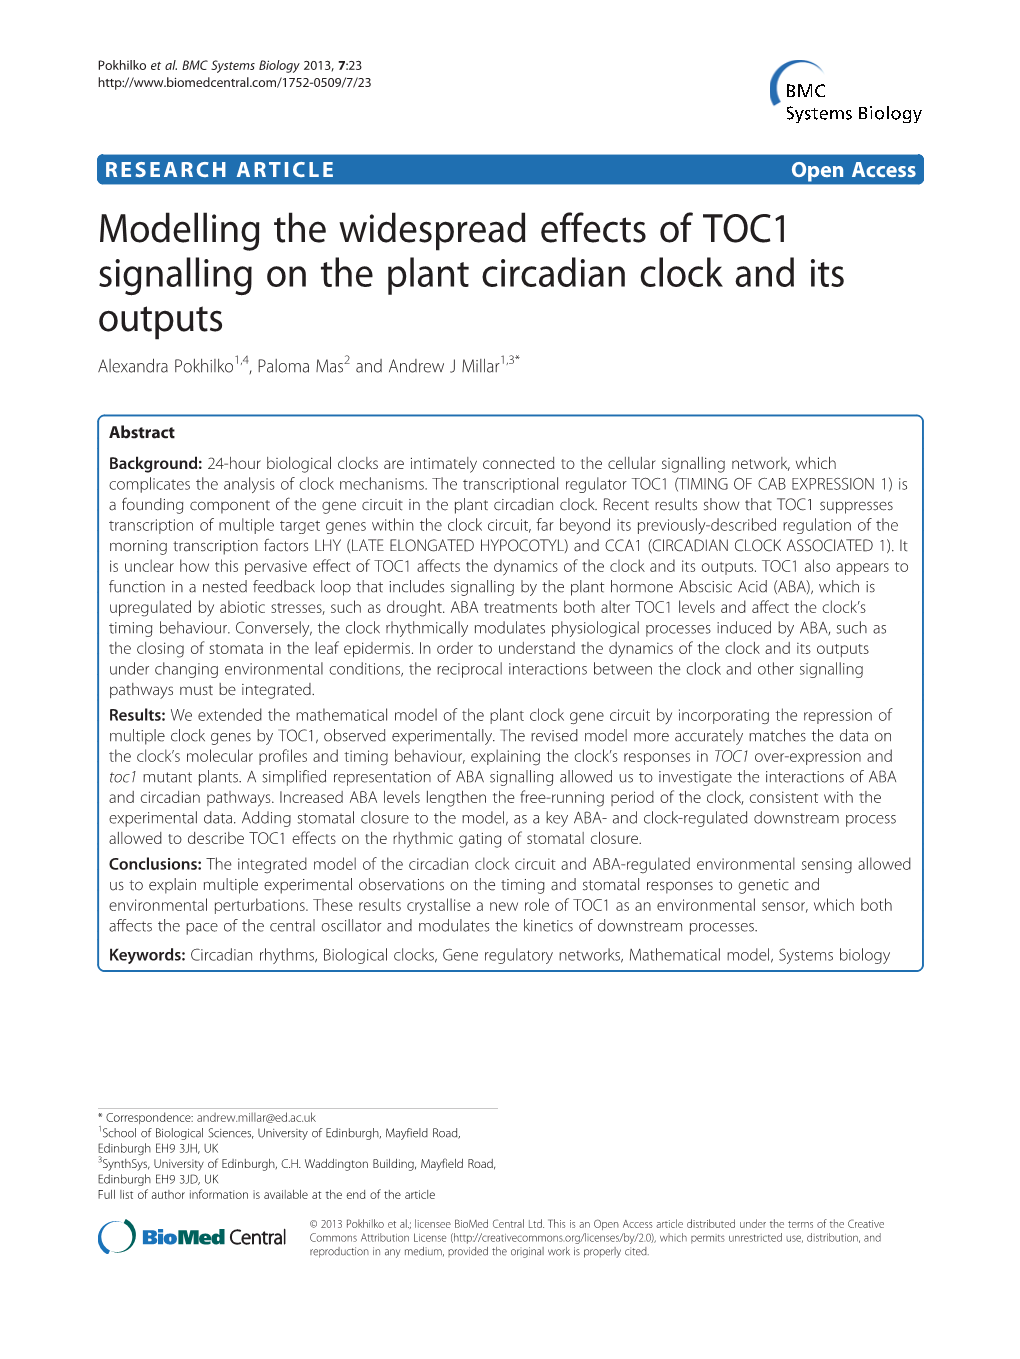 Modelling the Widespread Effects of TOC1 Signalling on the Plant Circadian Clock and Its Outputs Alexandra Pokhilko1,4, Paloma Mas2 and Andrew J Millar1,3*